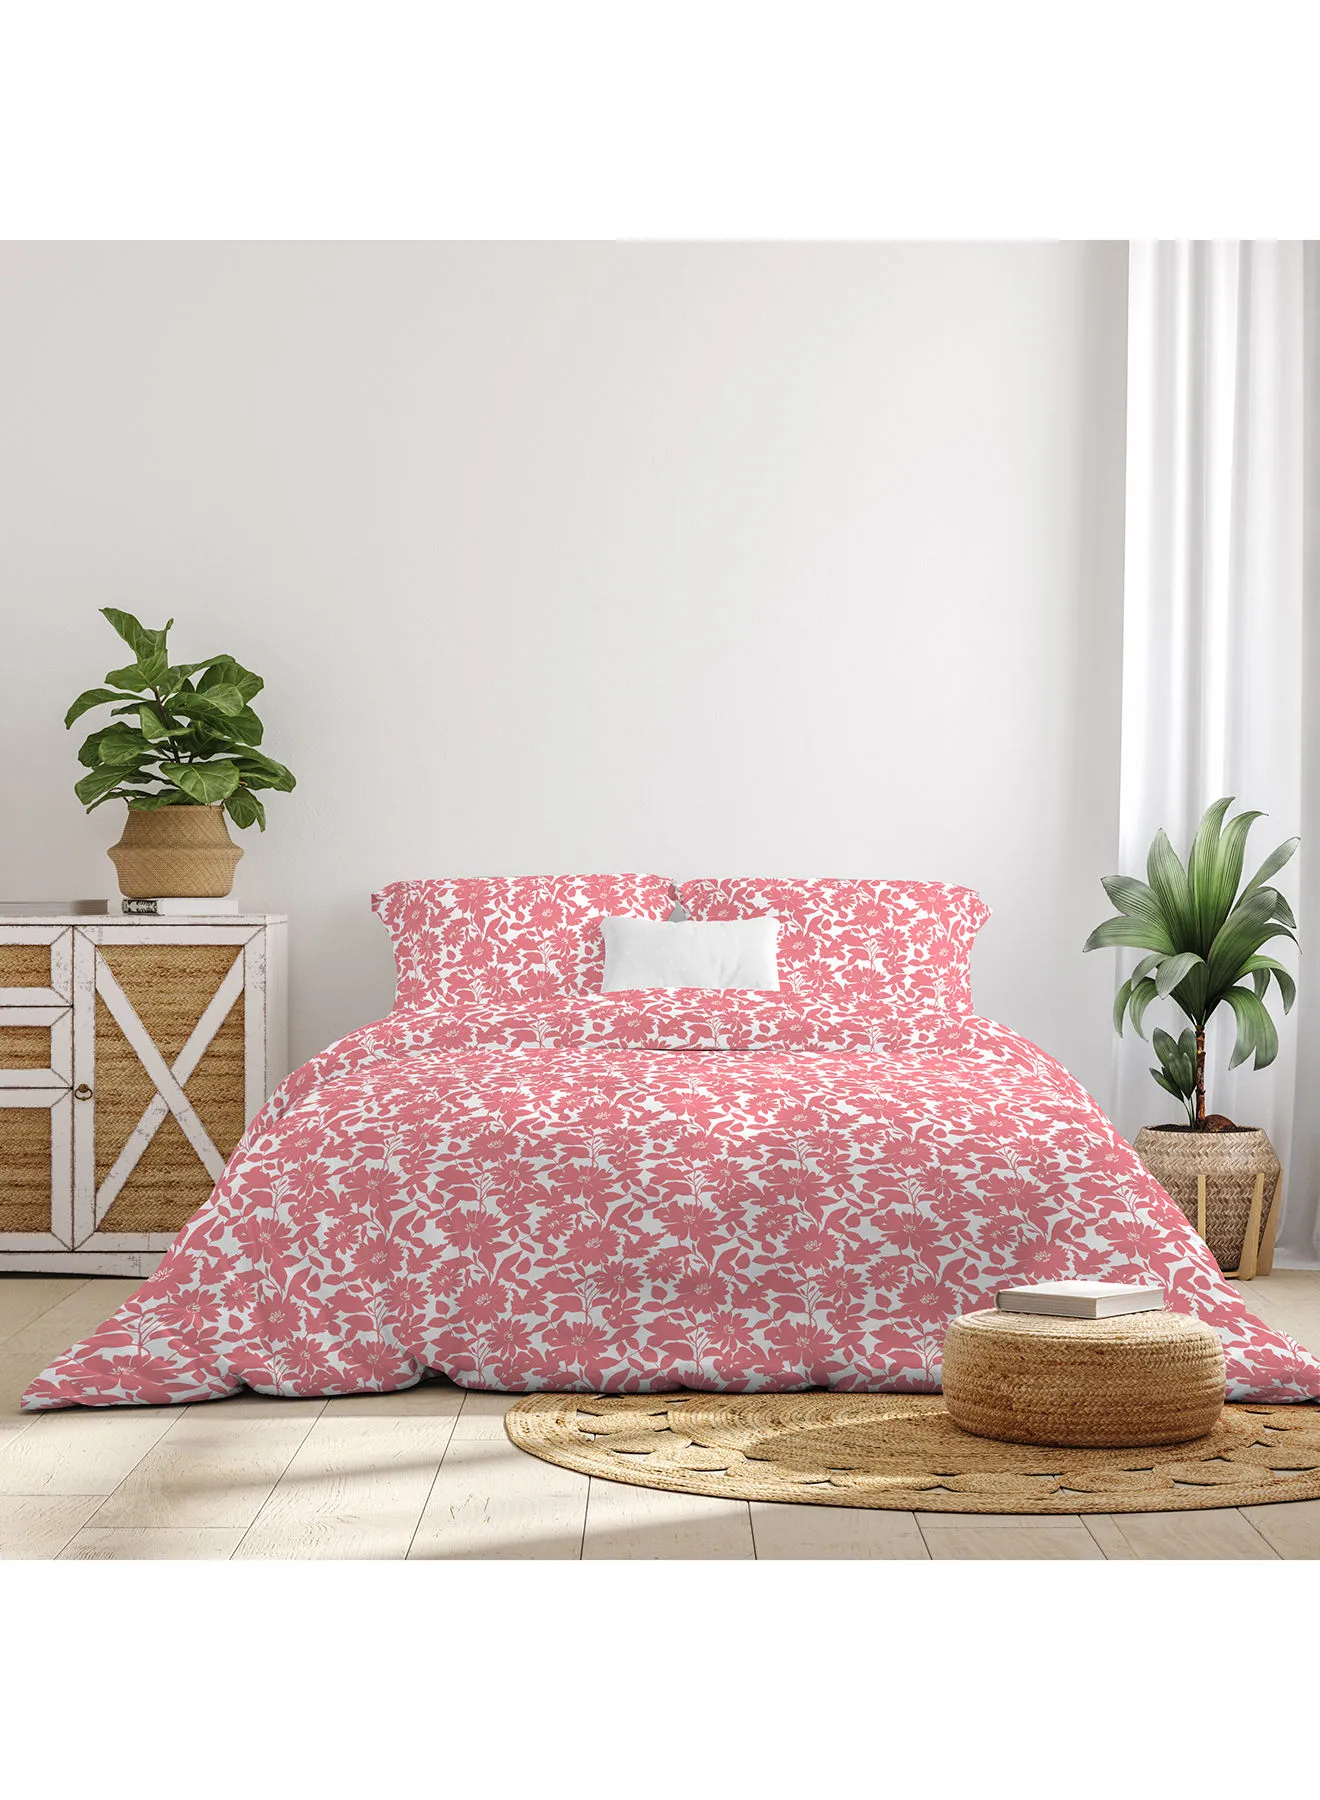 Amal Comforter Set Queen Size All Season Everyday Use Bedding Set 100% Cotton 3 Pieces 1 Comforter 2 Pillow Covers  Pink